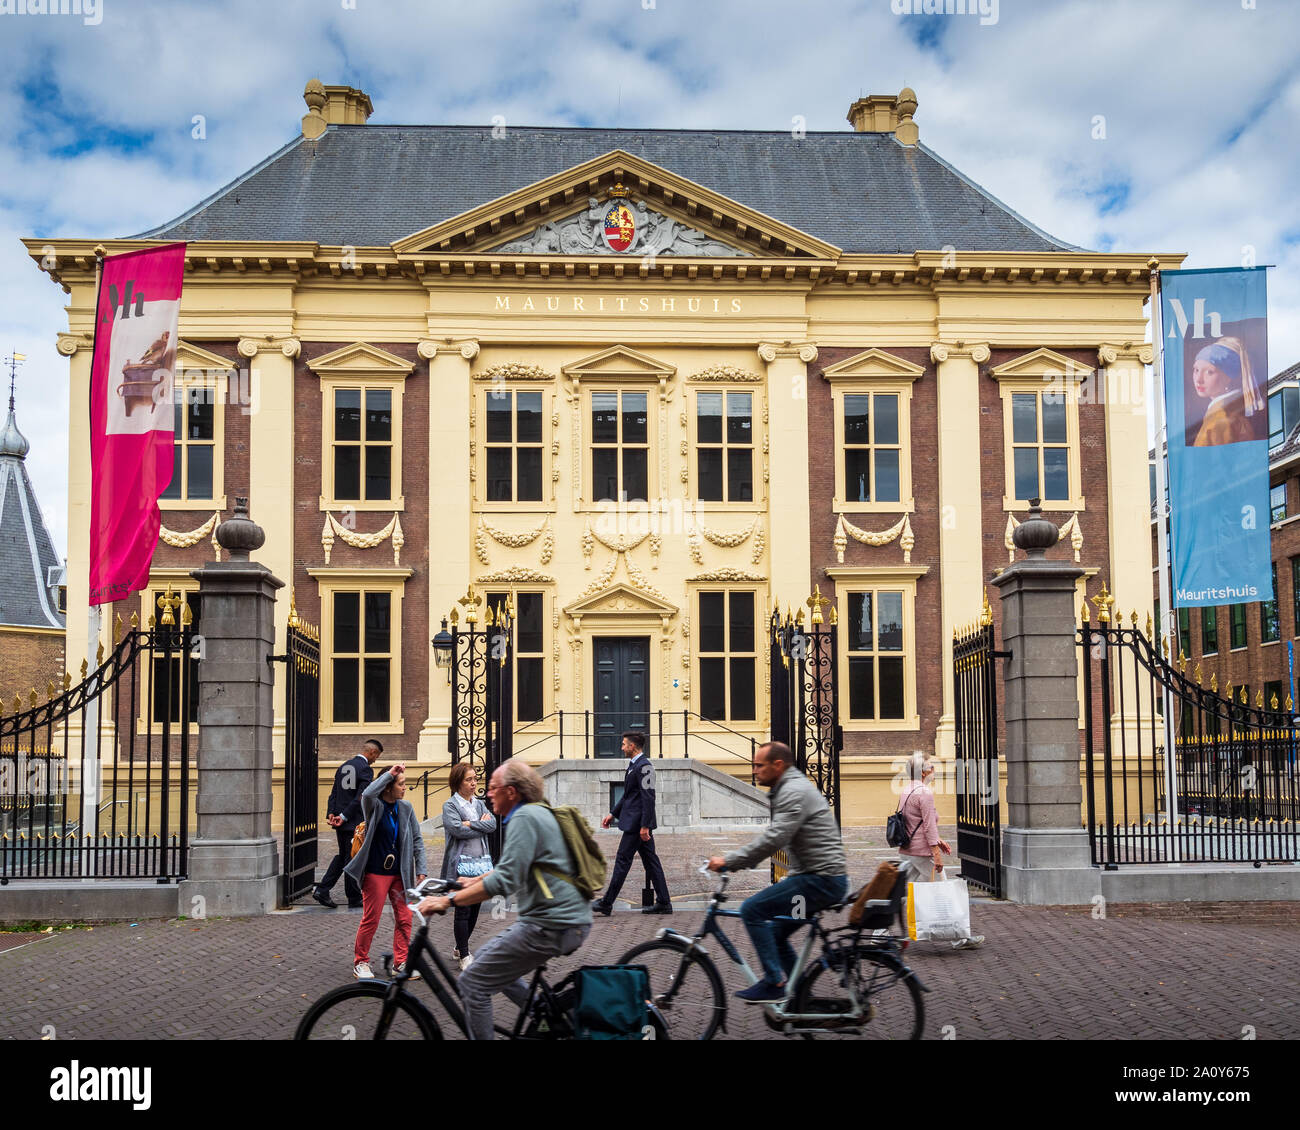 Mauritshuis Den Haag Mauritshuis The Hague, C17th art gallery specialising in Dutch Golden Age paintings including Vermeer's Girl with a Pearl Earring Stock Photo